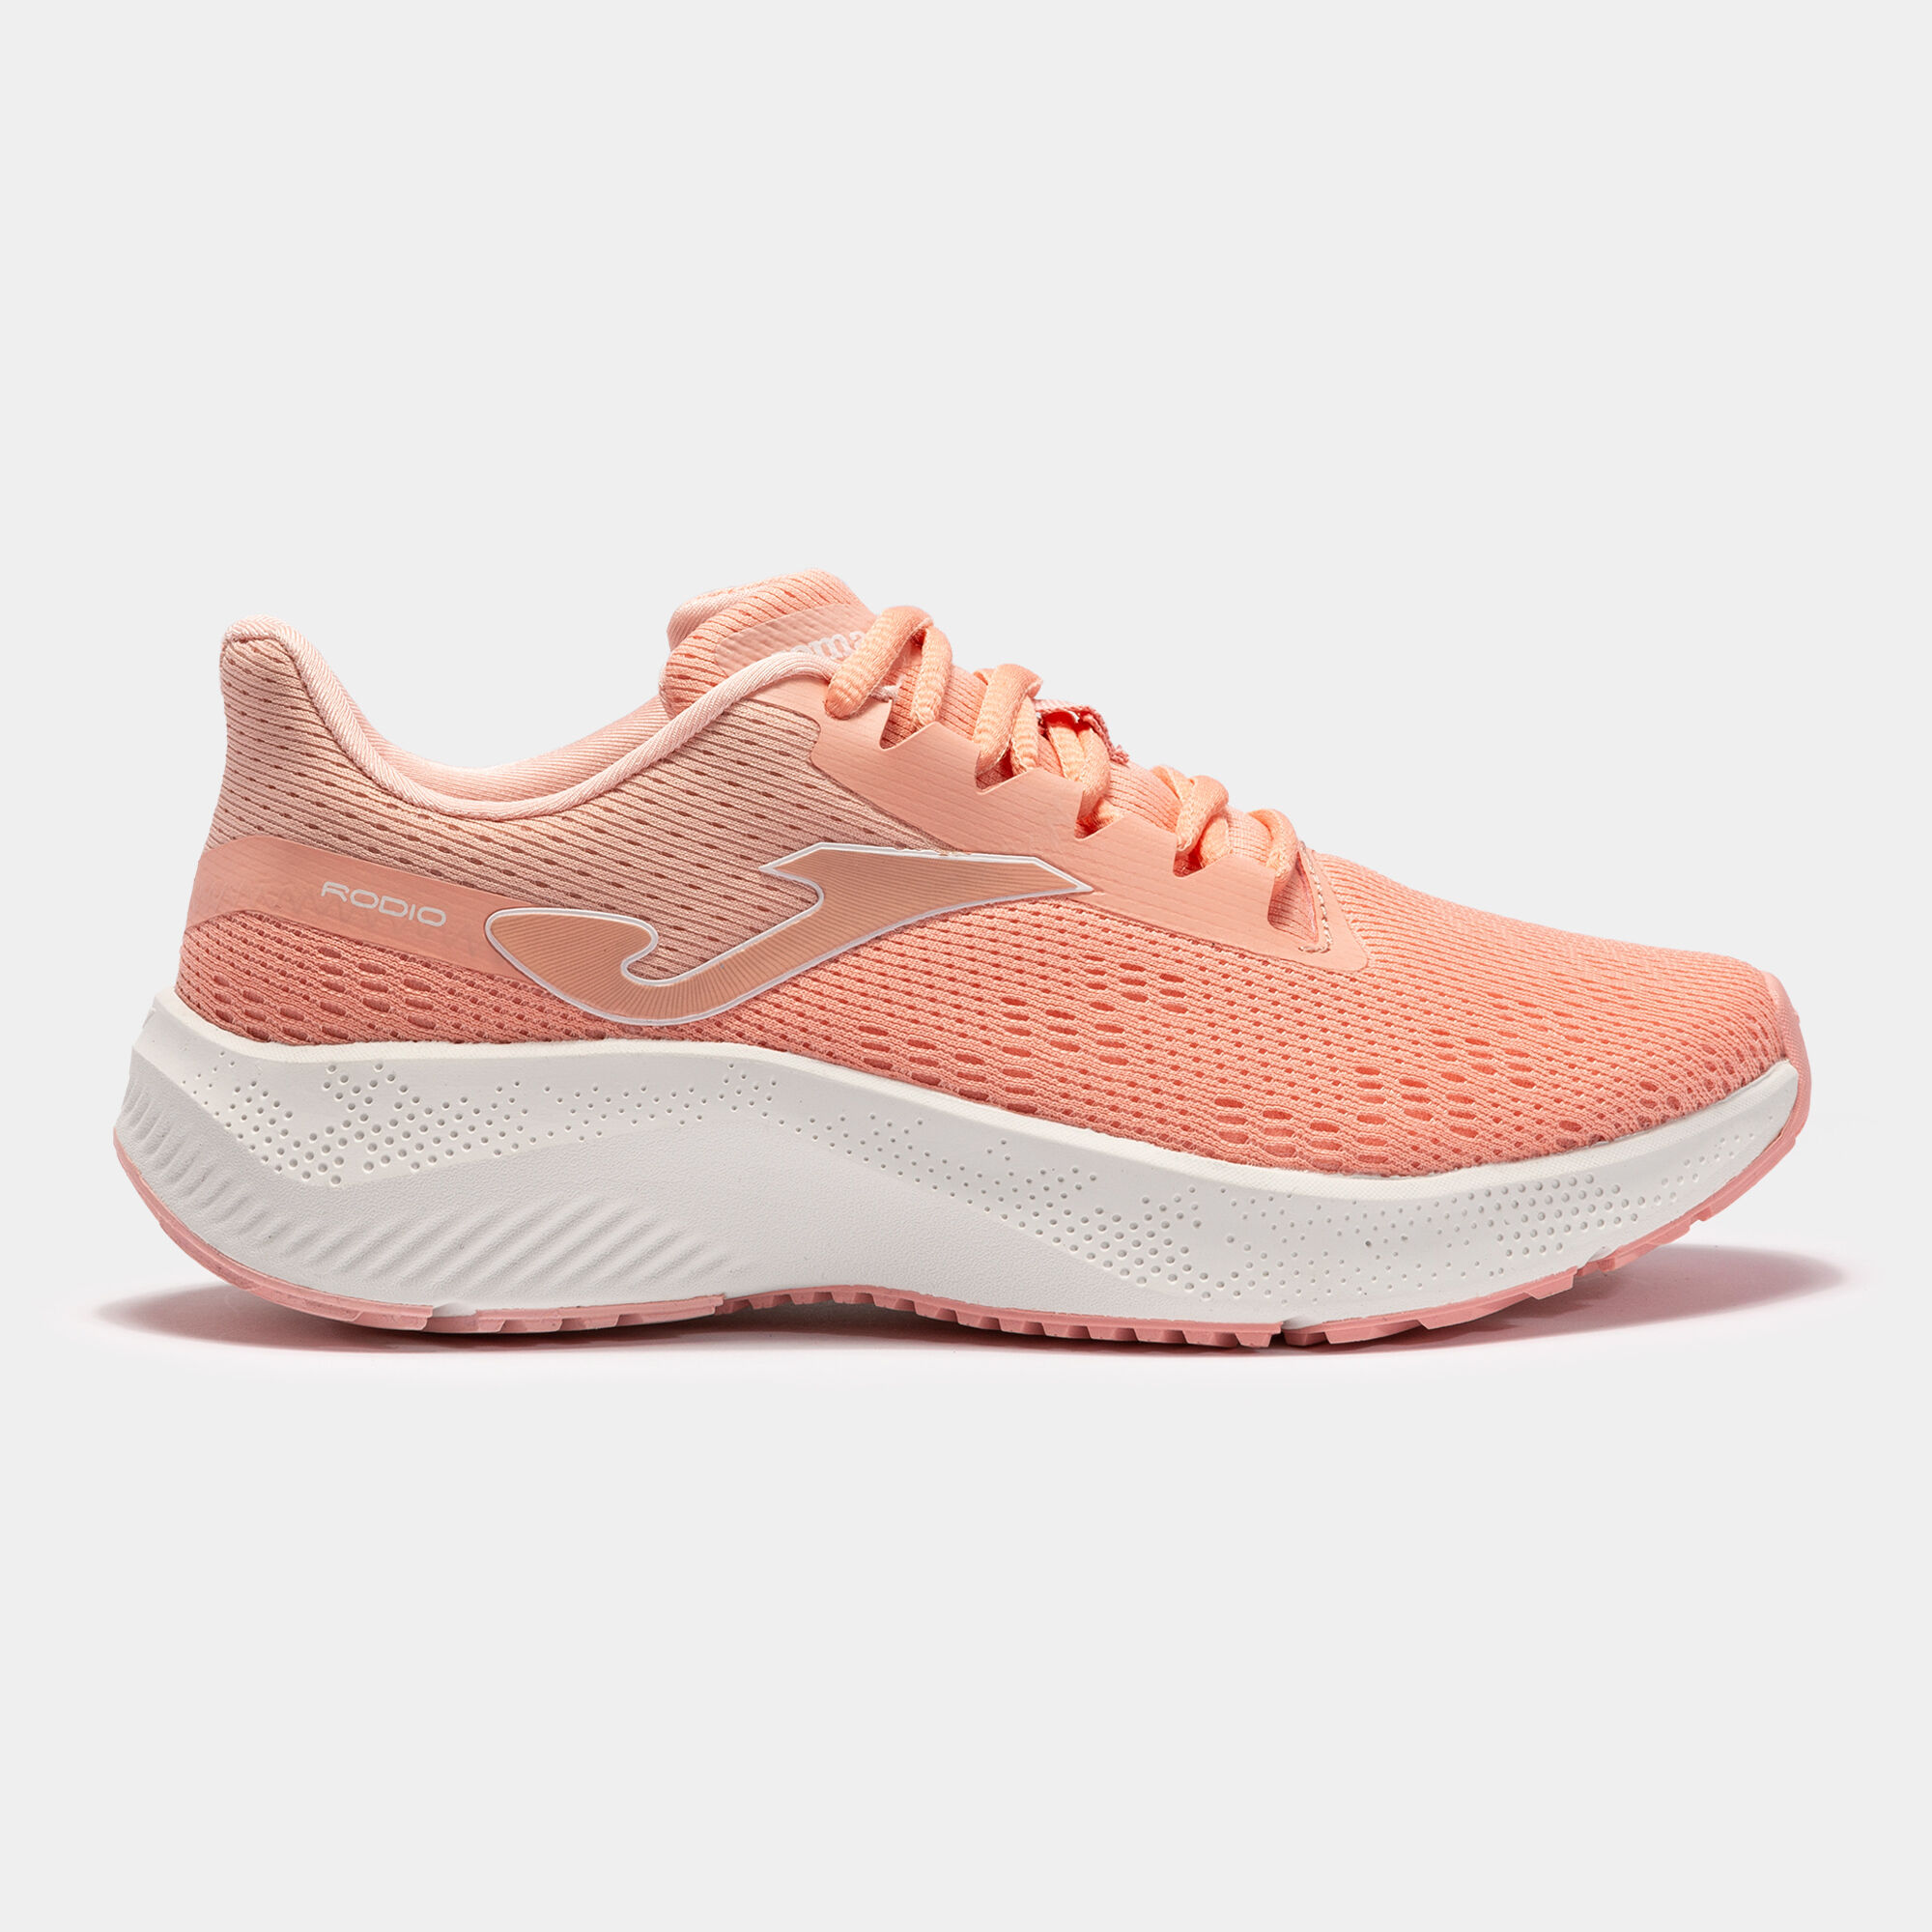 SAPATILHAS RUNNING RODIO 22 MULHER CORAL